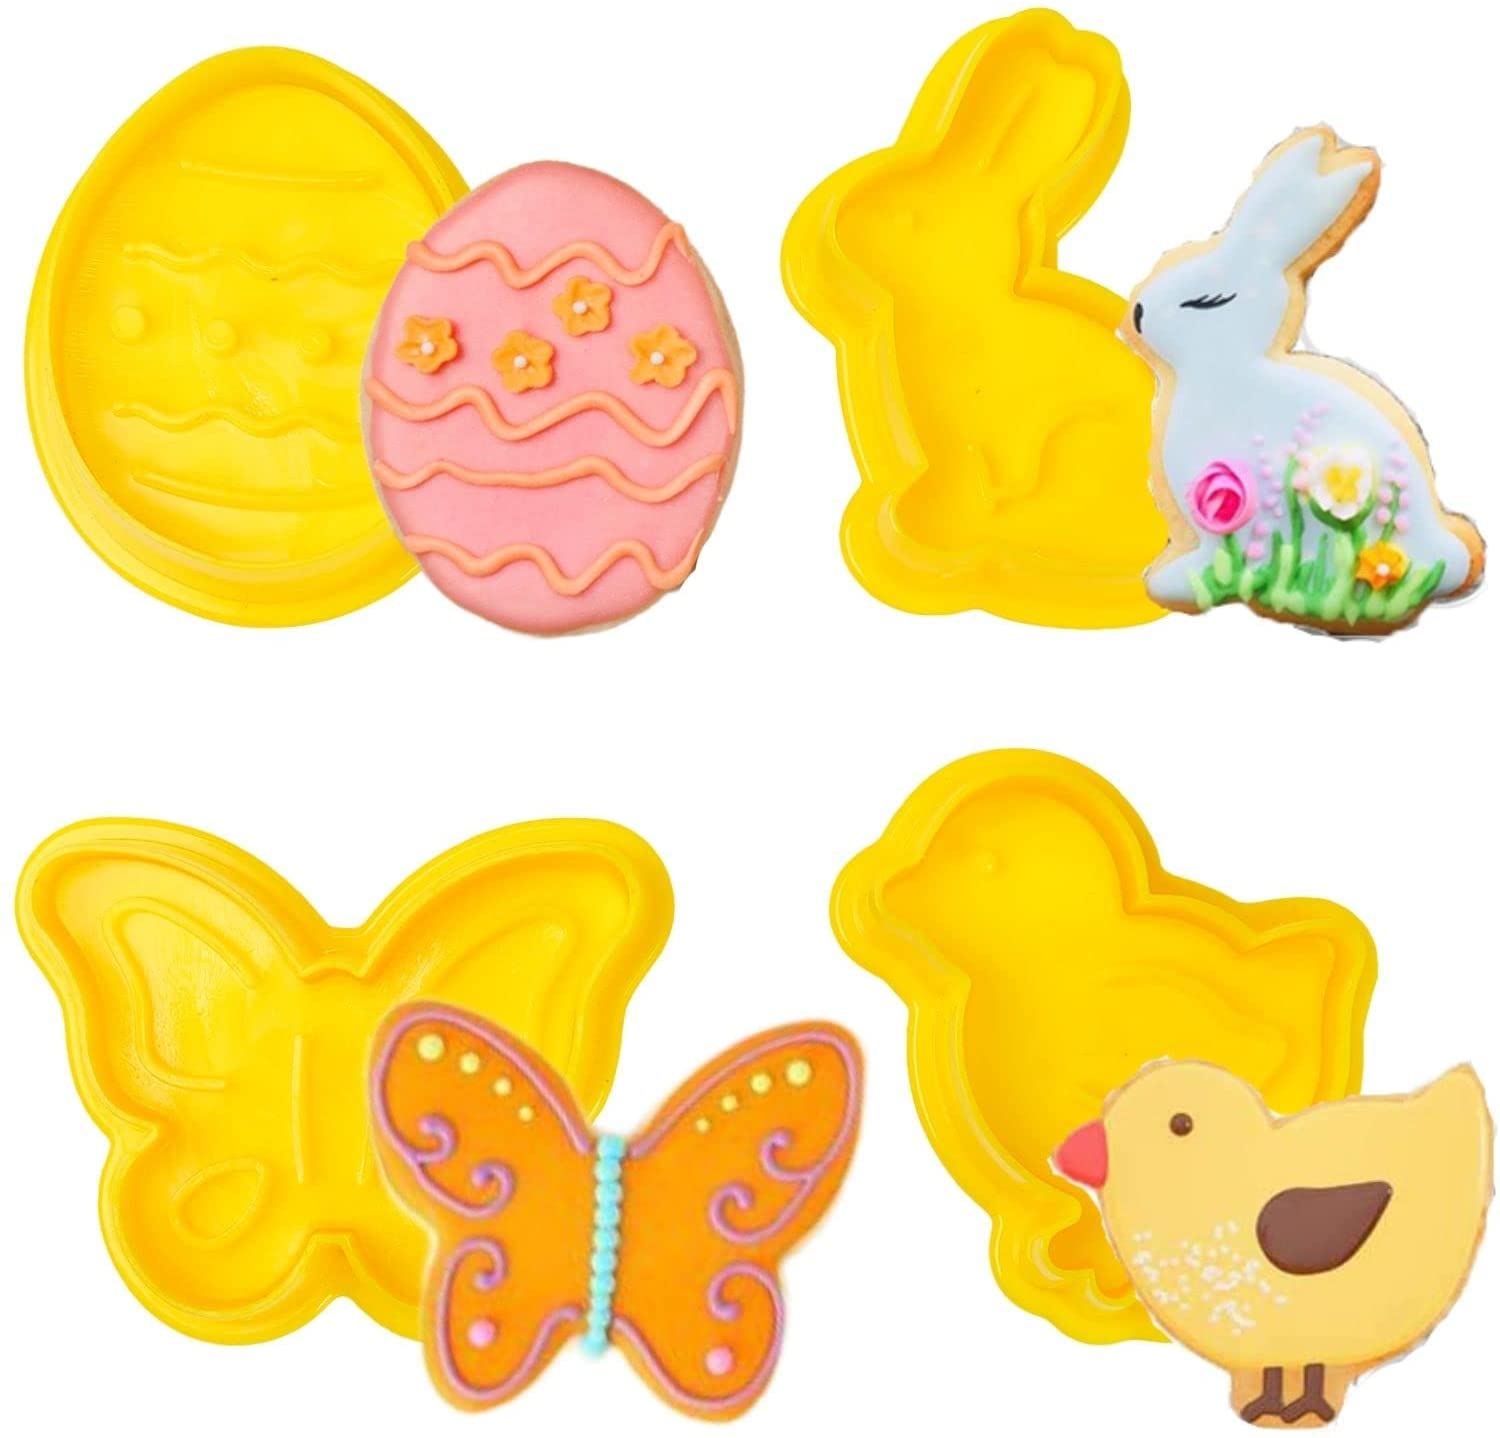 Keepaty 4pc Easter Cookie Cutter Set 3D Plastic Embosser RRP £5.99 CLEARANCE XL £2.99